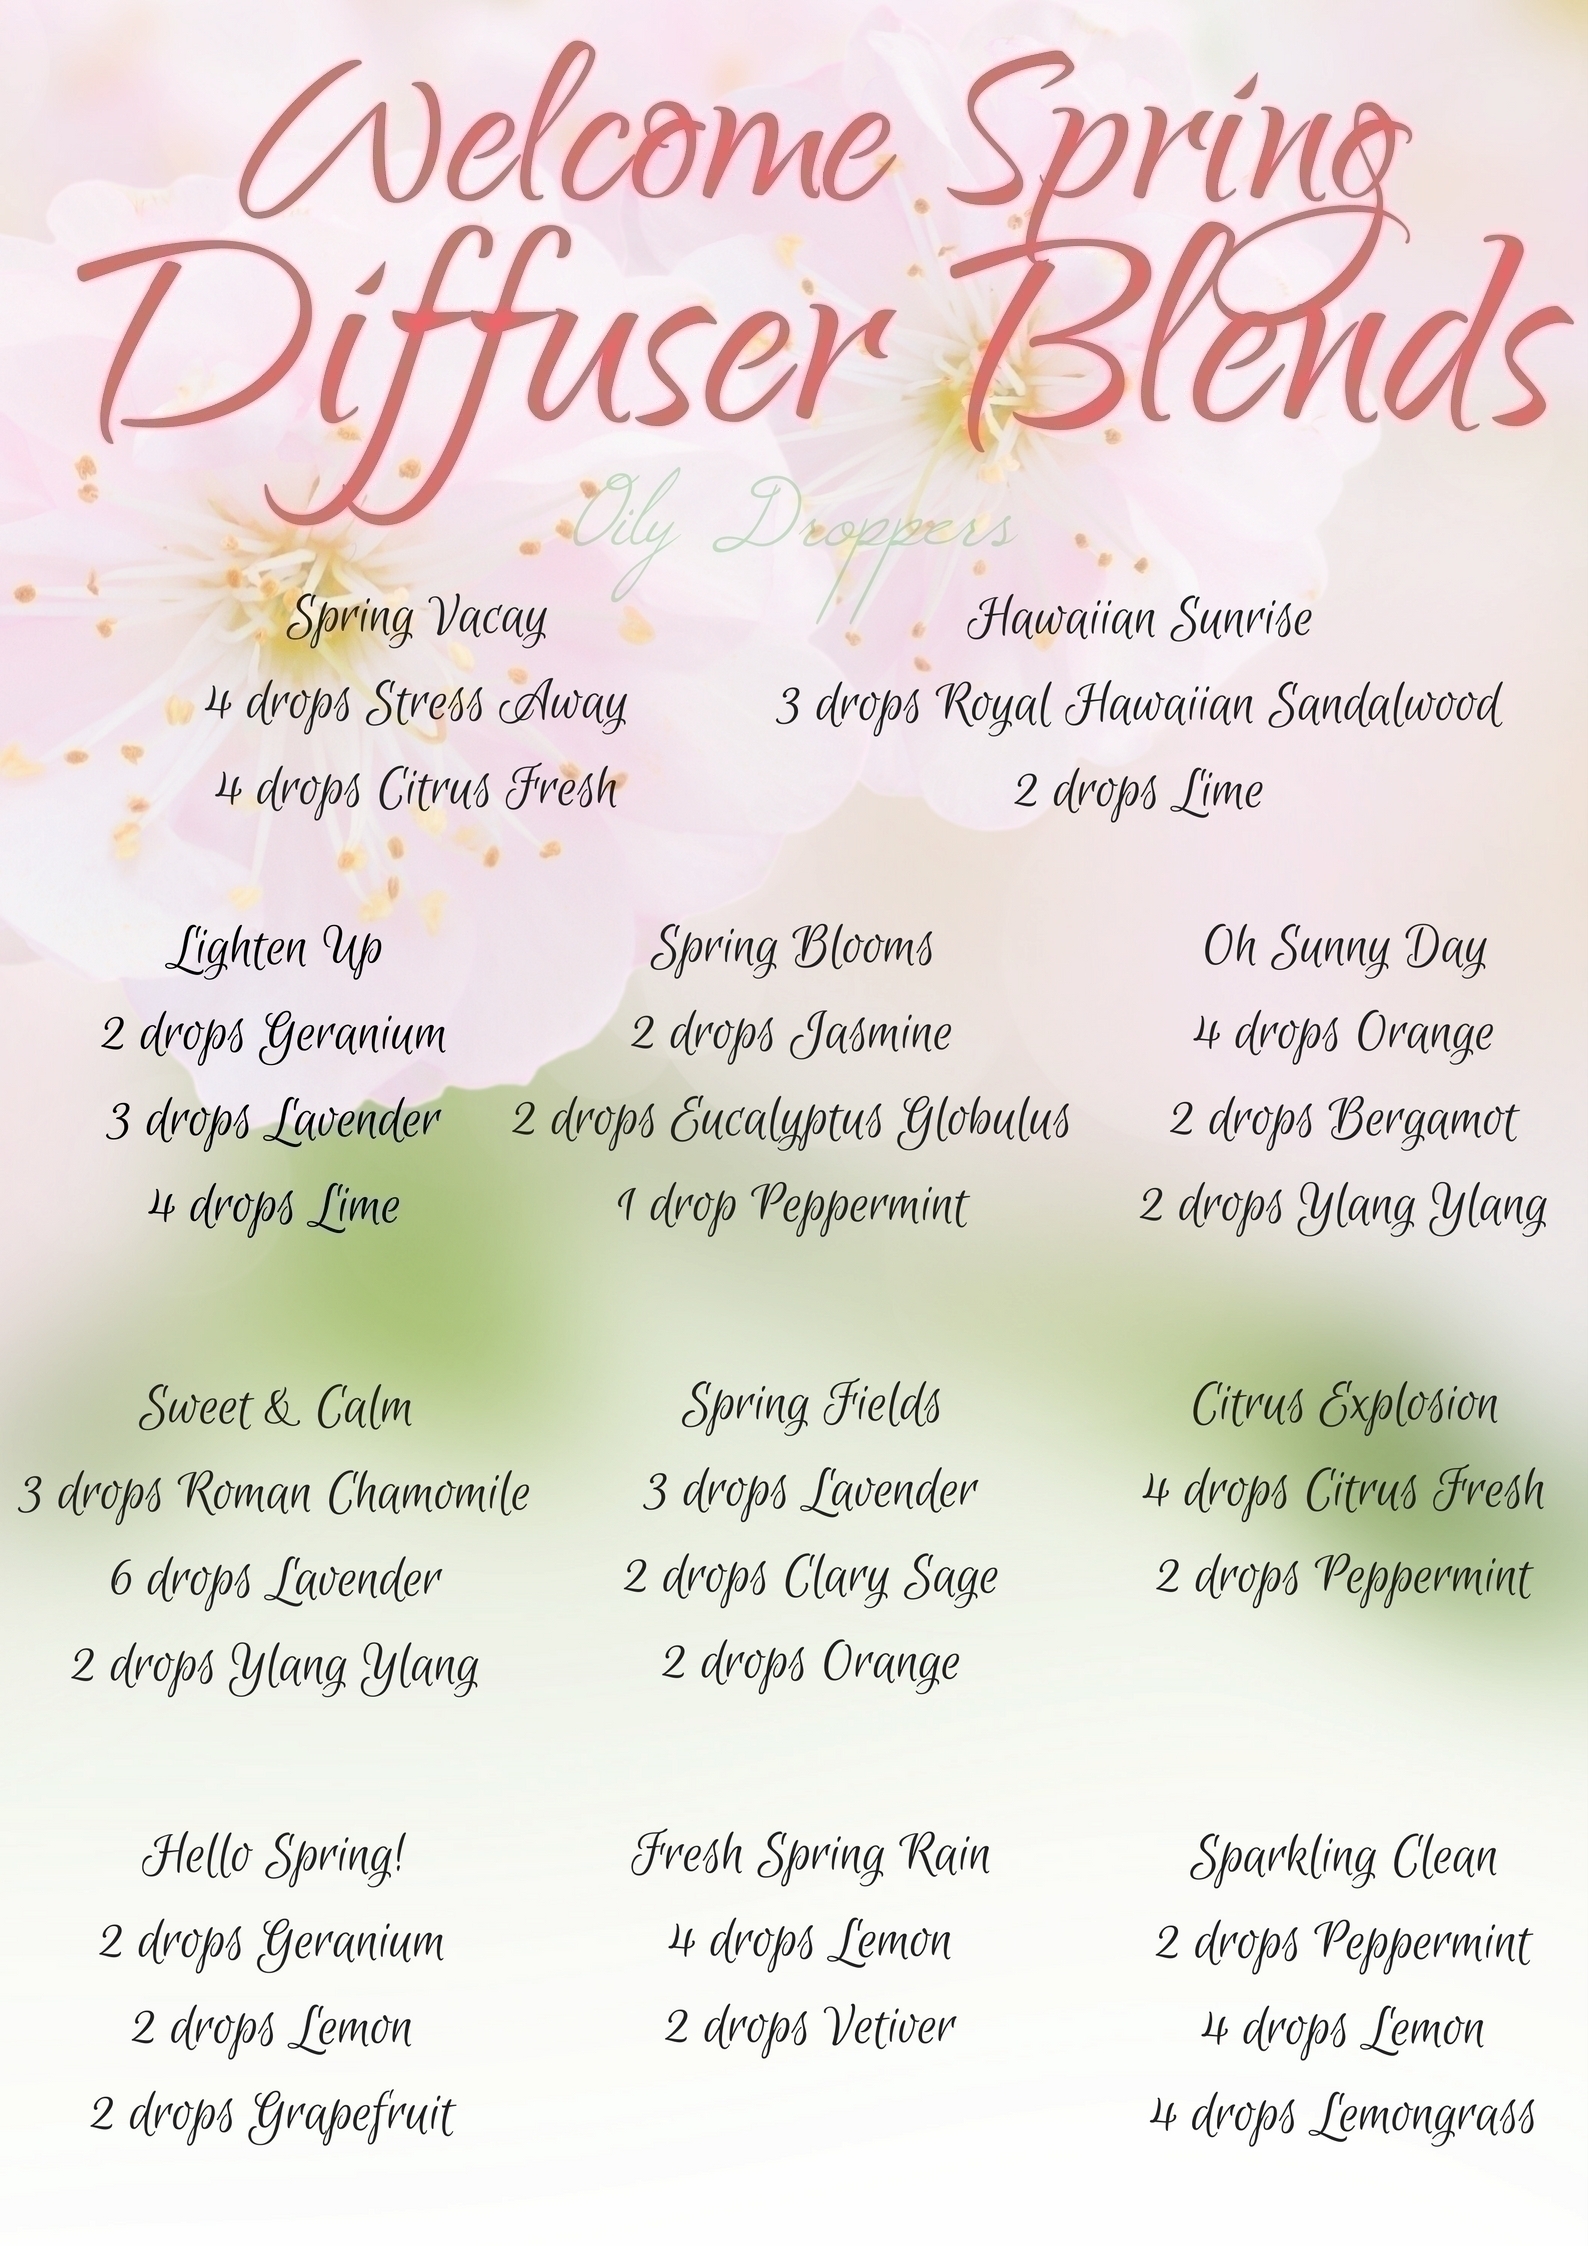 It's almost Spring here in our area of the country, and what better time to conjure up some diffuser blends to help us welcome warmer weather!